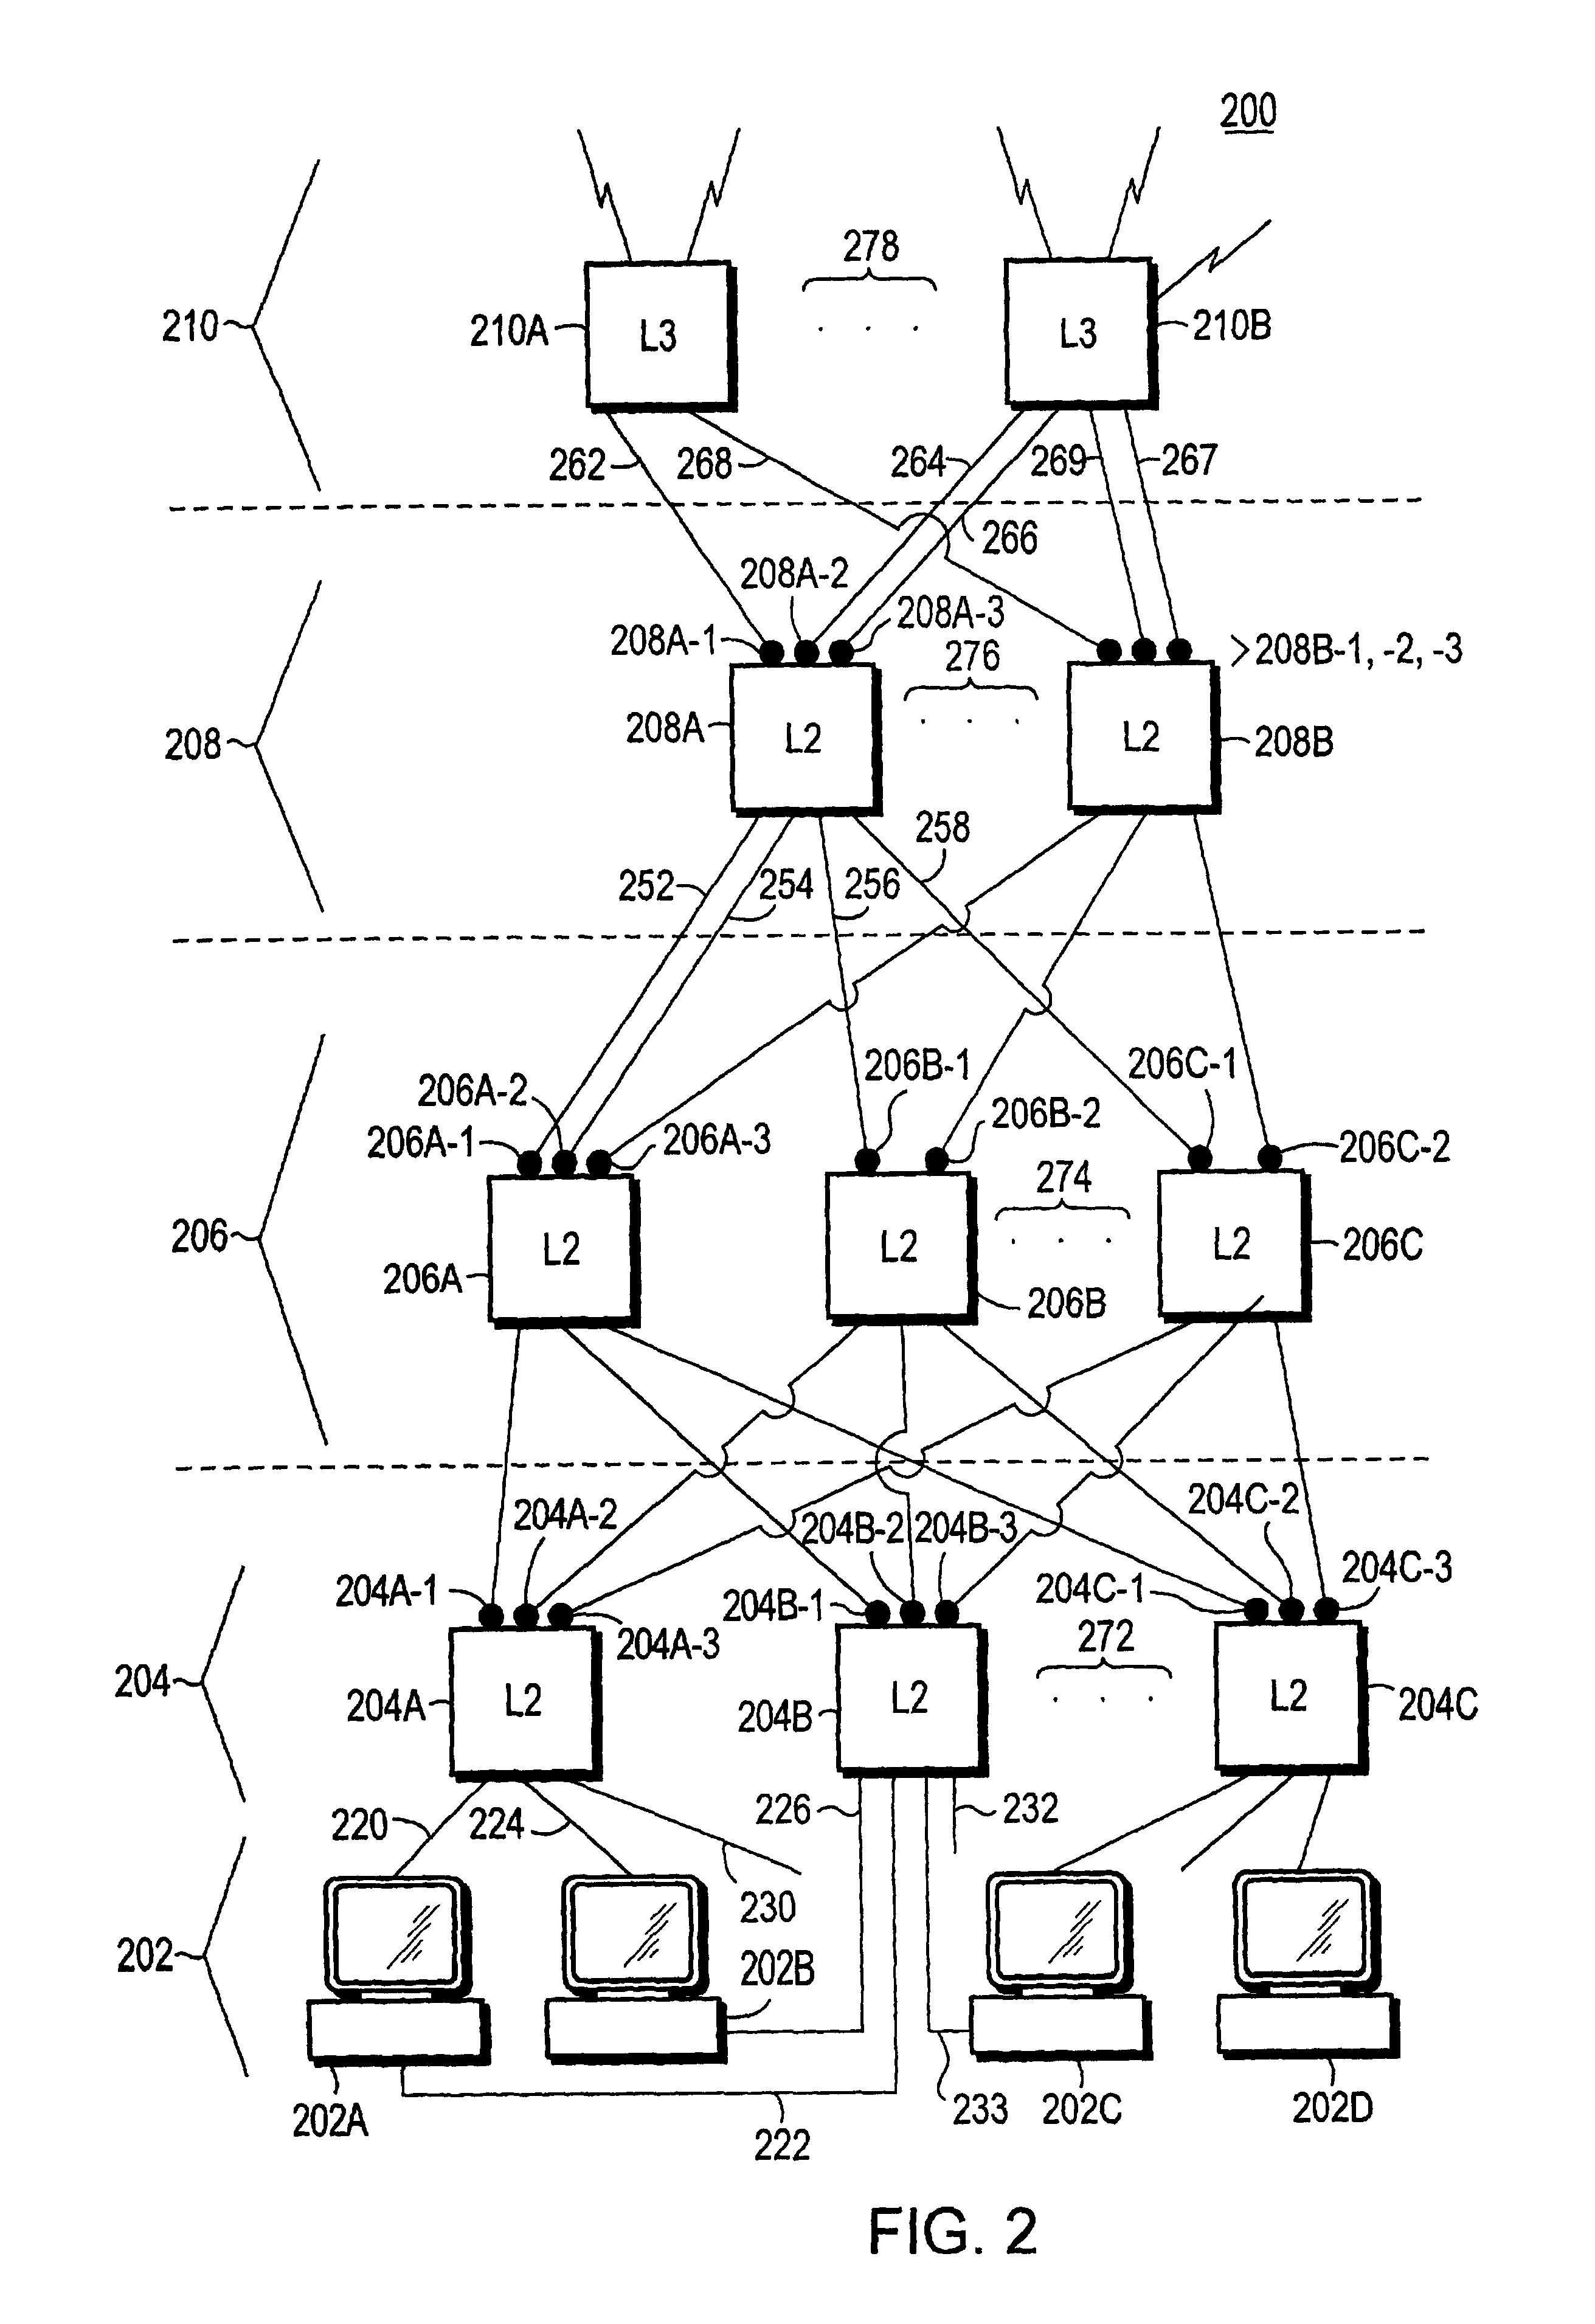 Apparatus and method for preventing one way connectivity loops in a computer network